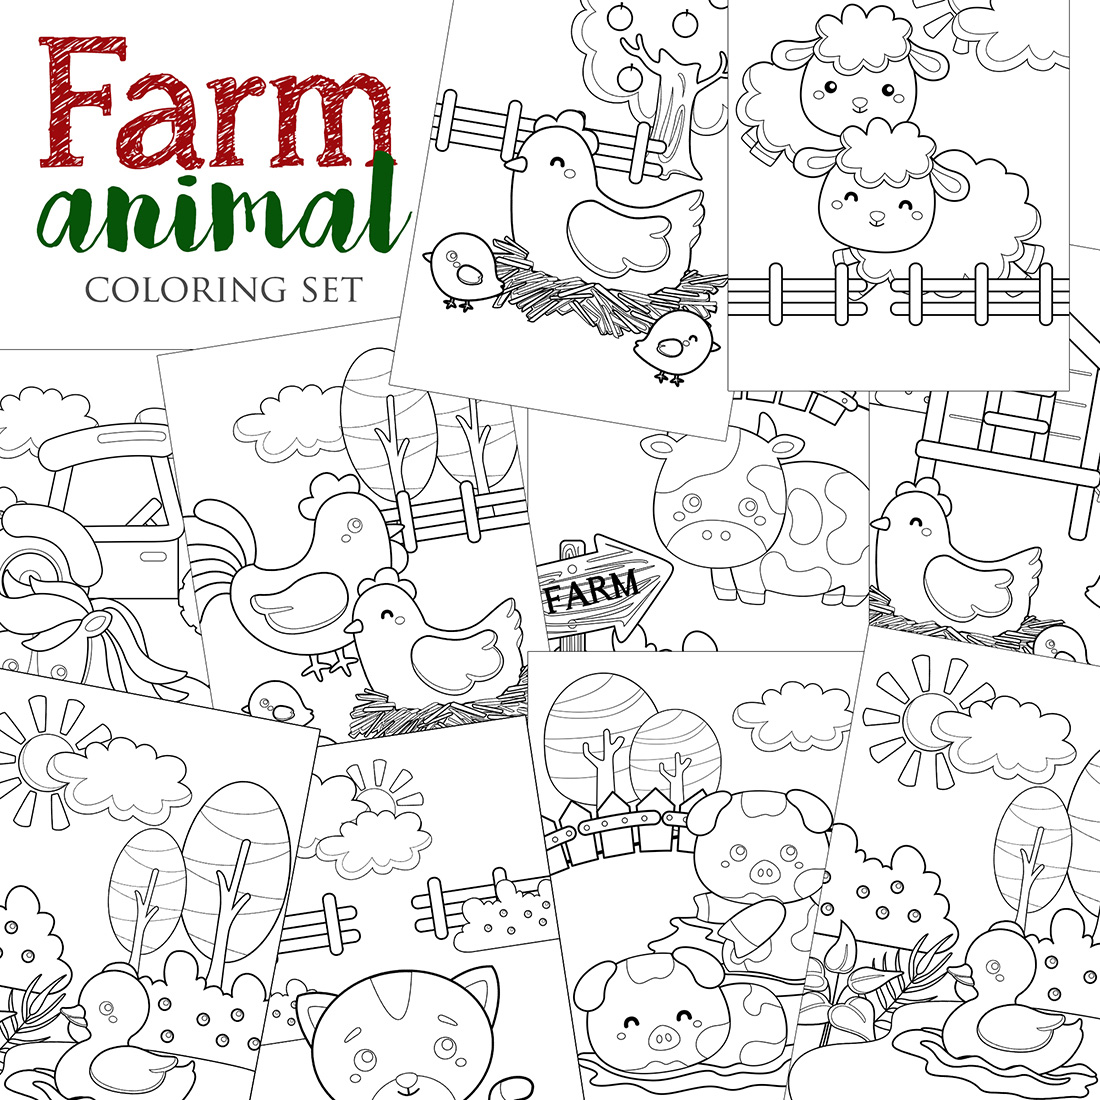 Cute Farm Animals Like Sheep Cow Horse Chicken Pig Nature and Farmer Tractor Coloring for Kids and Adult cover image.